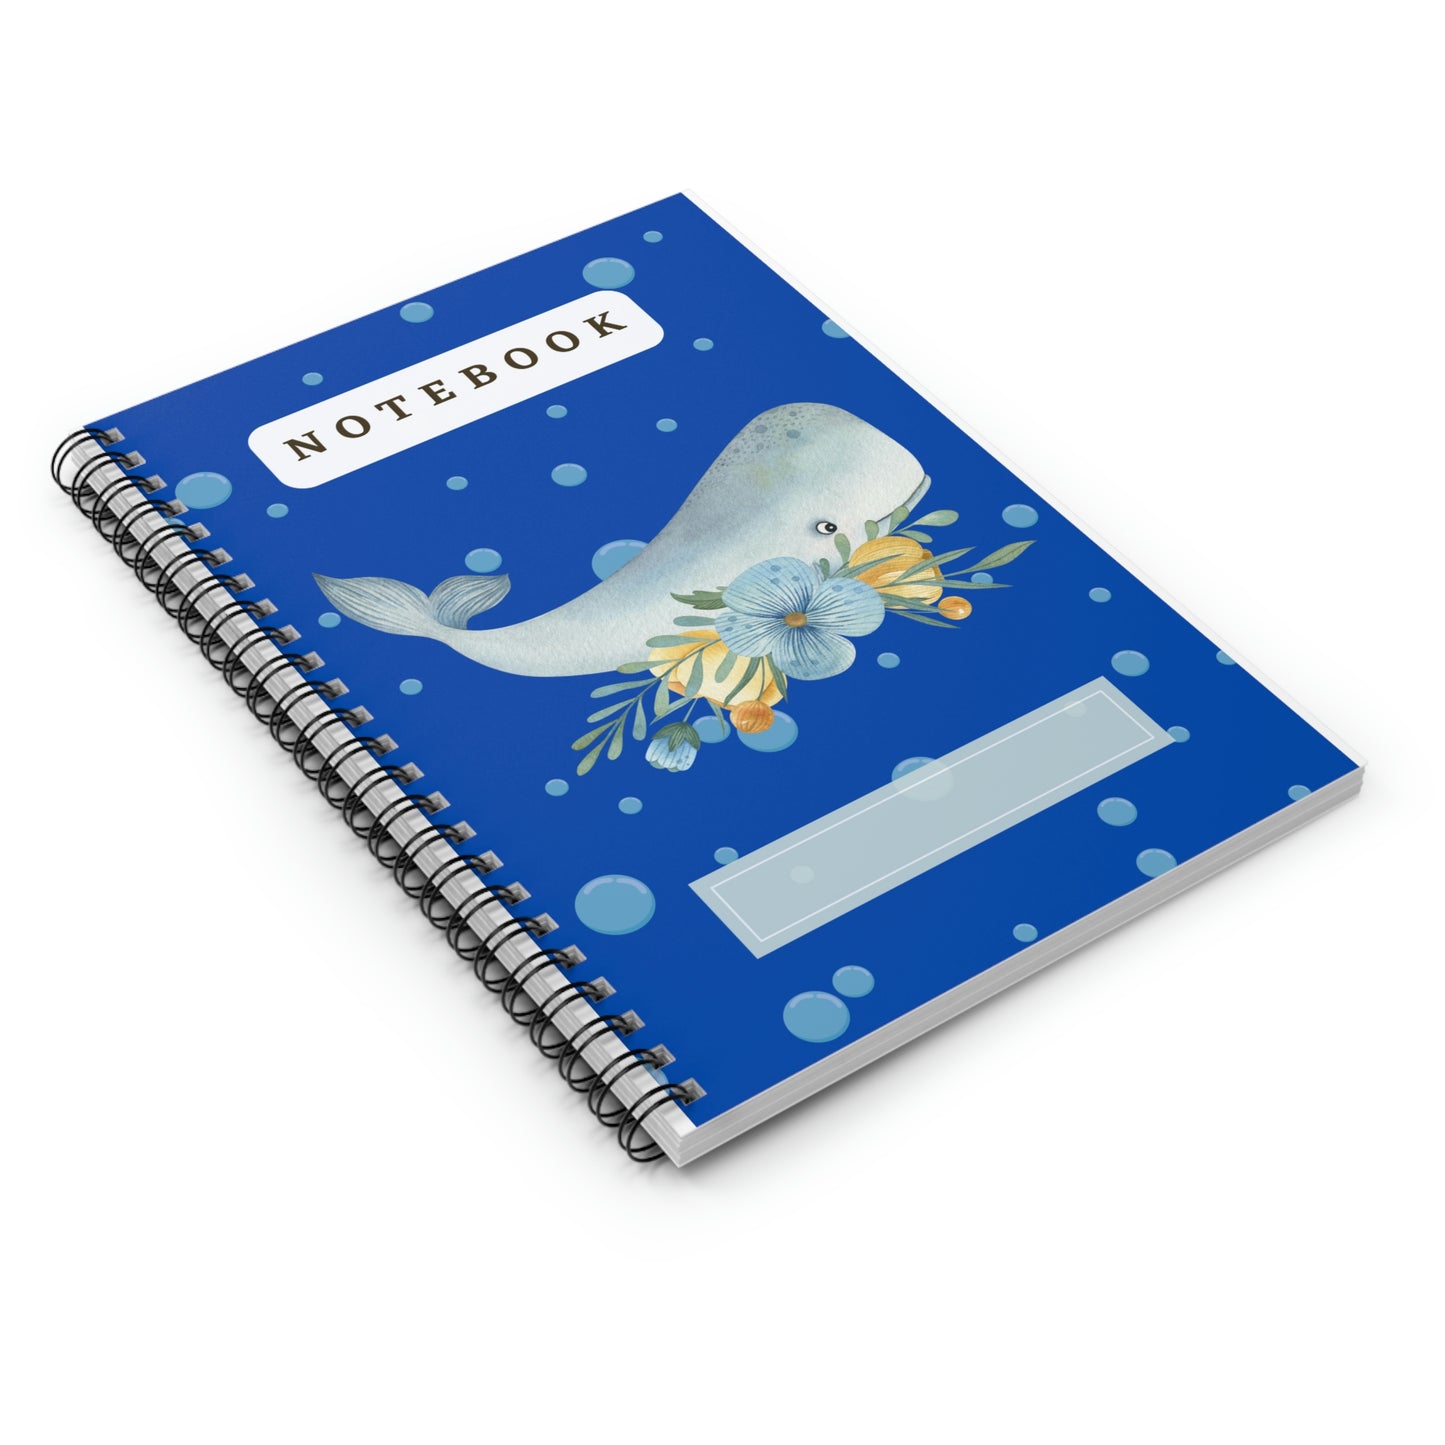 Whale and Flower design (Blue) Spiral Notebook - Ruled Line 118 pages